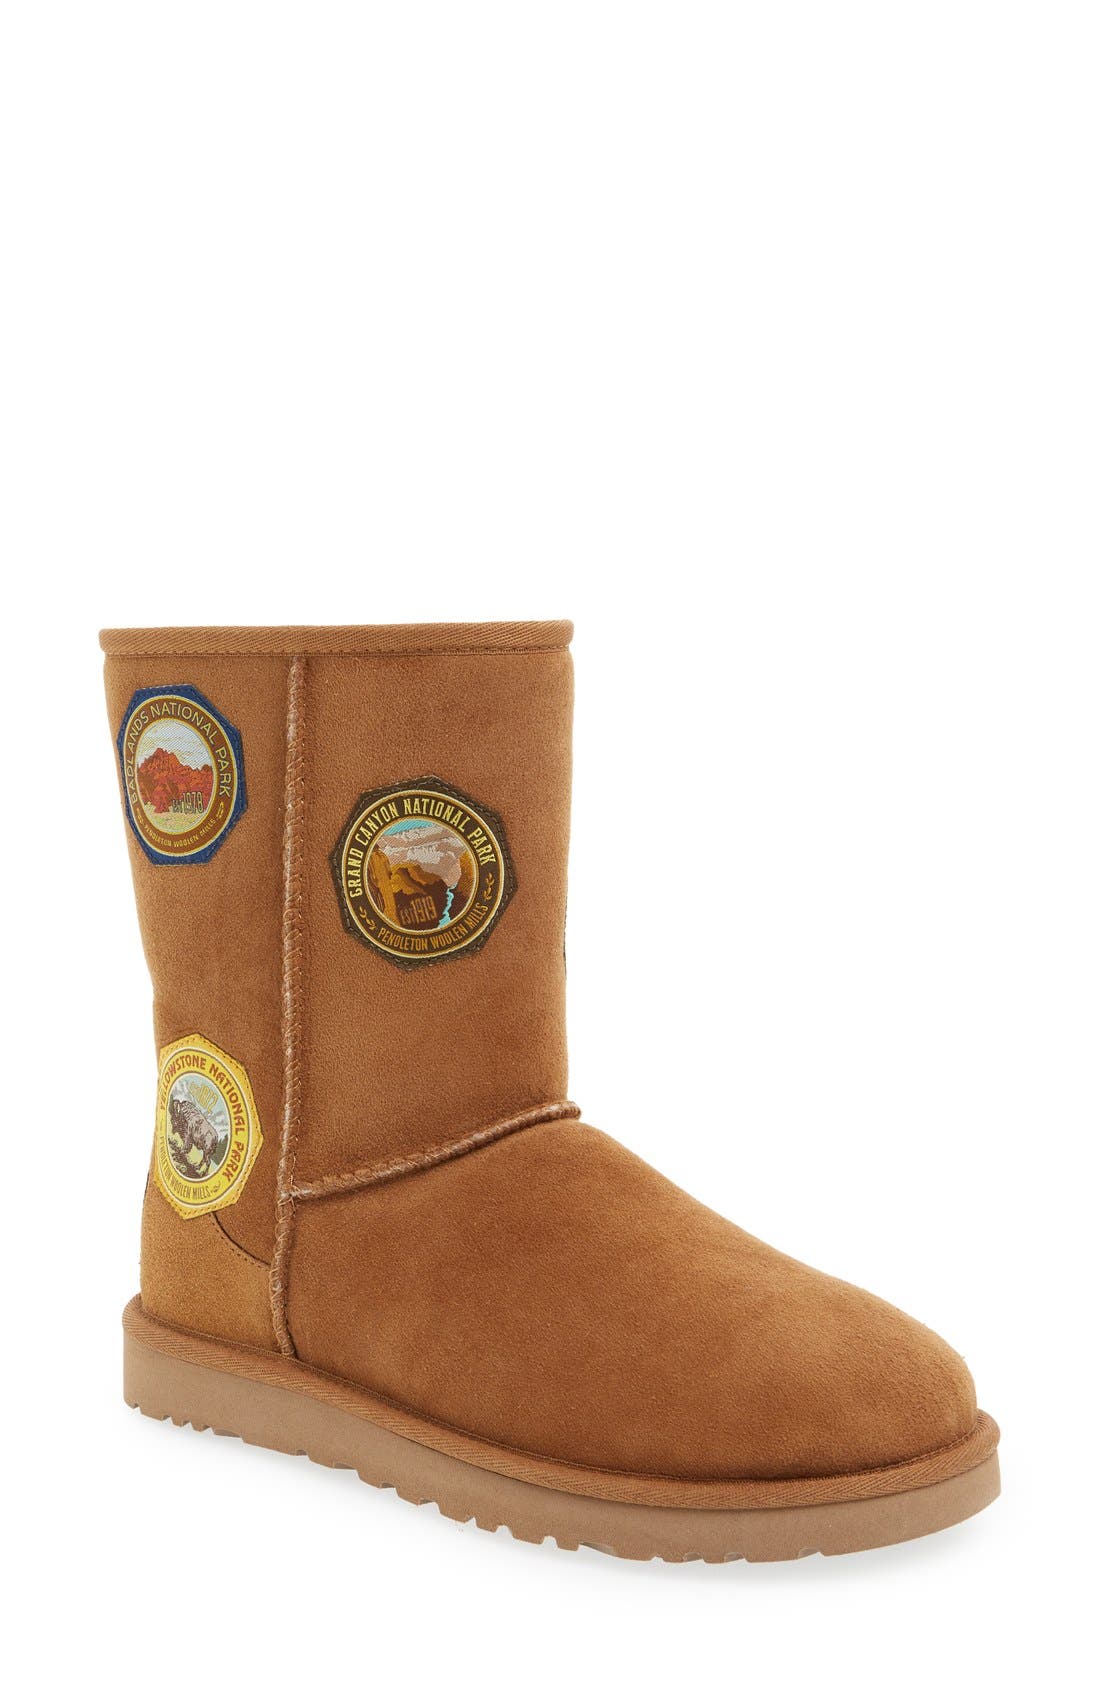 patches for uggs